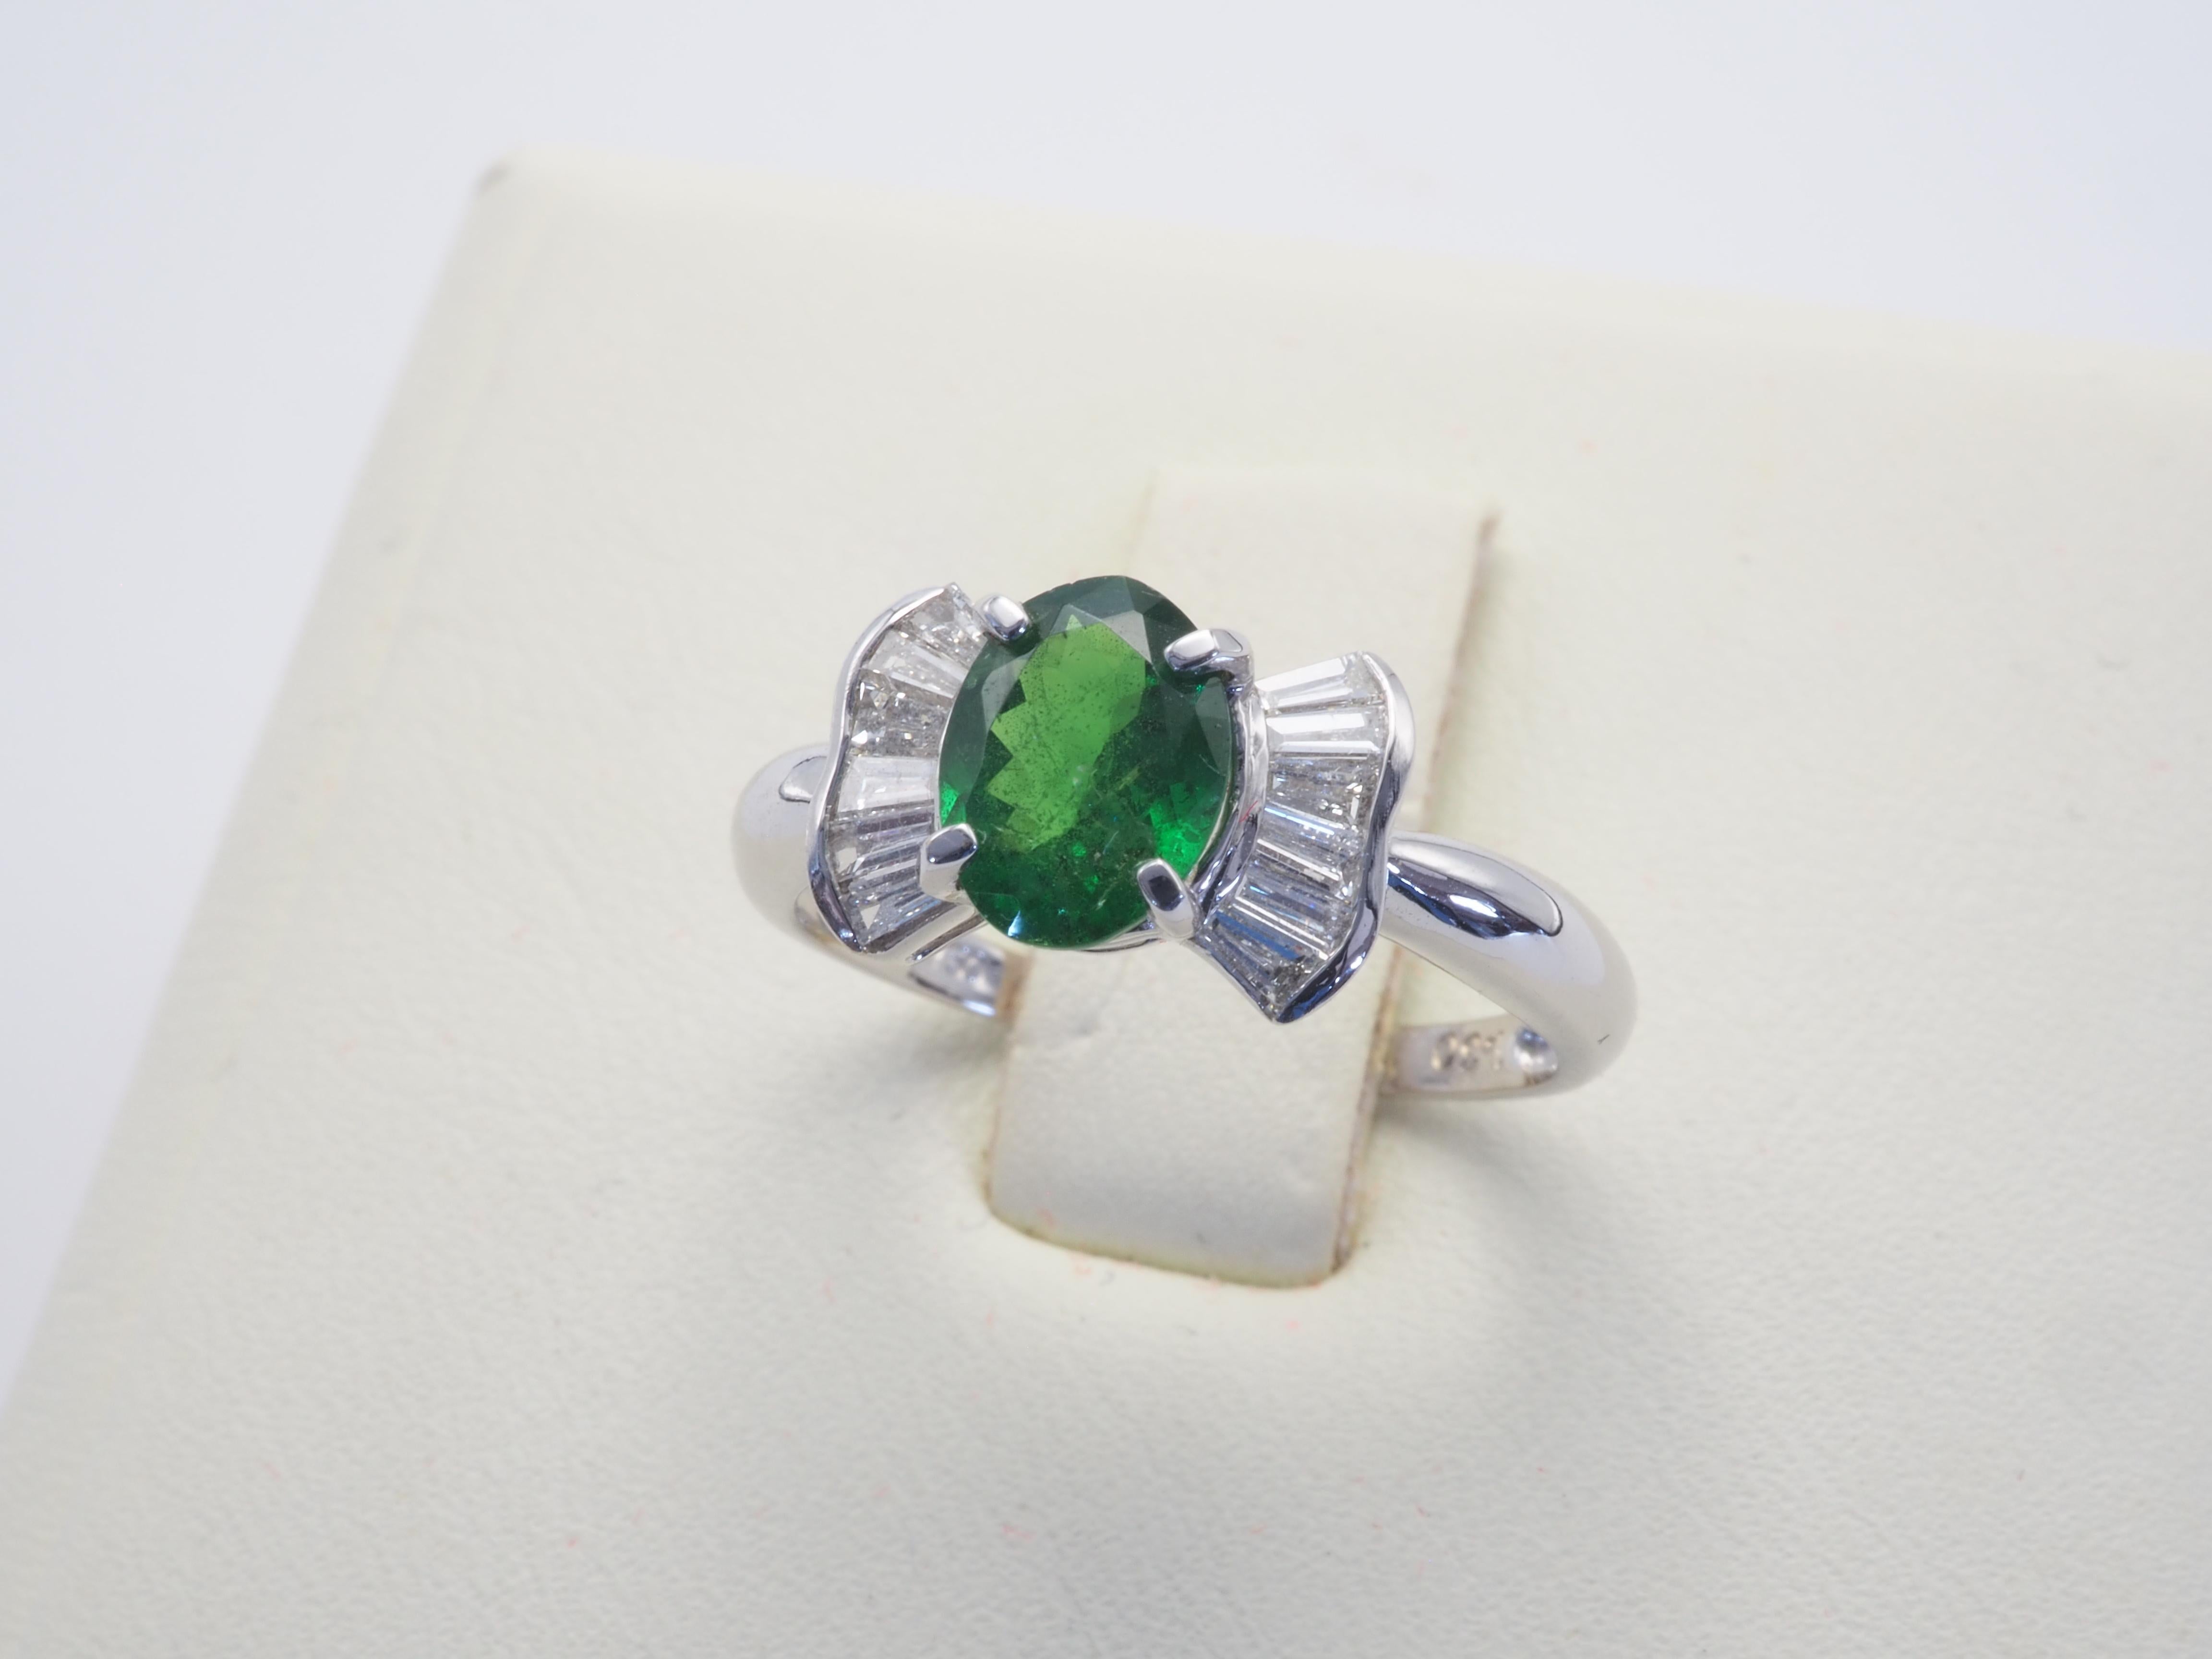 18K White Gold 1.35ct Oval Tsavorite & 0.32ct Bow Tie Ring For Sale 2